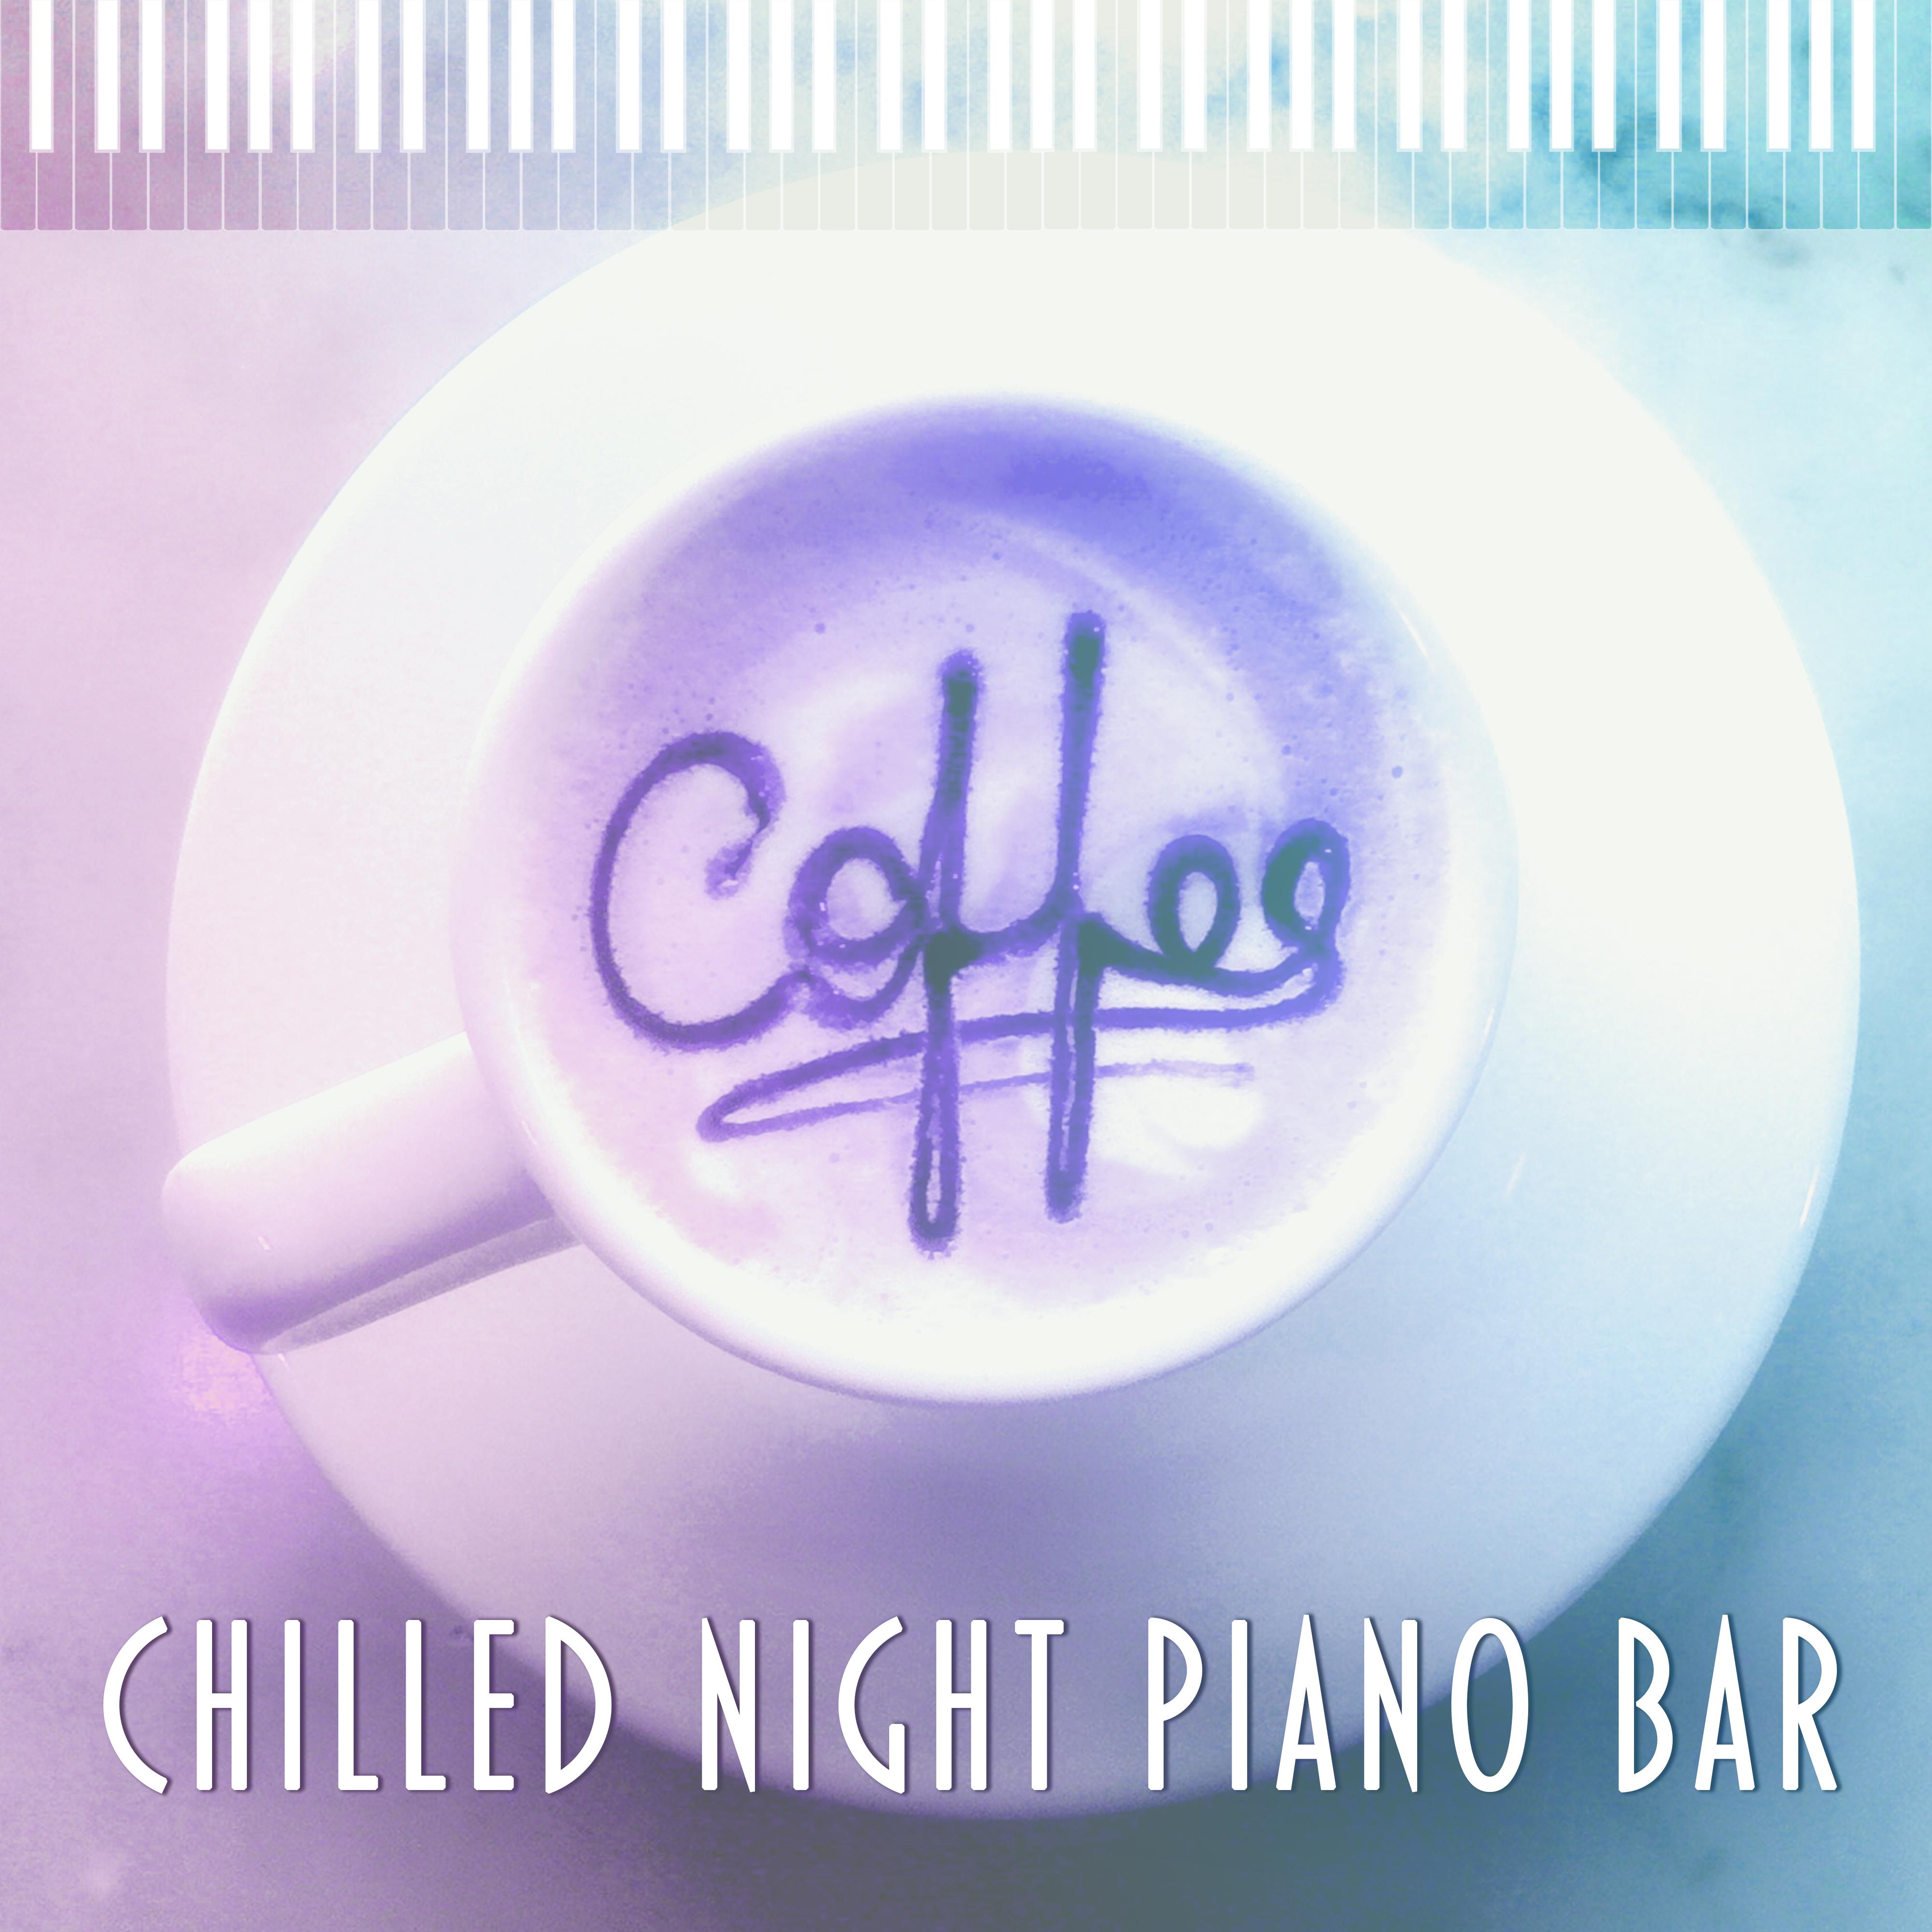 Chilled Night Piano Bar – Chilled Jazz, Jazz Fest, Smooth Piano, Relaxing Music